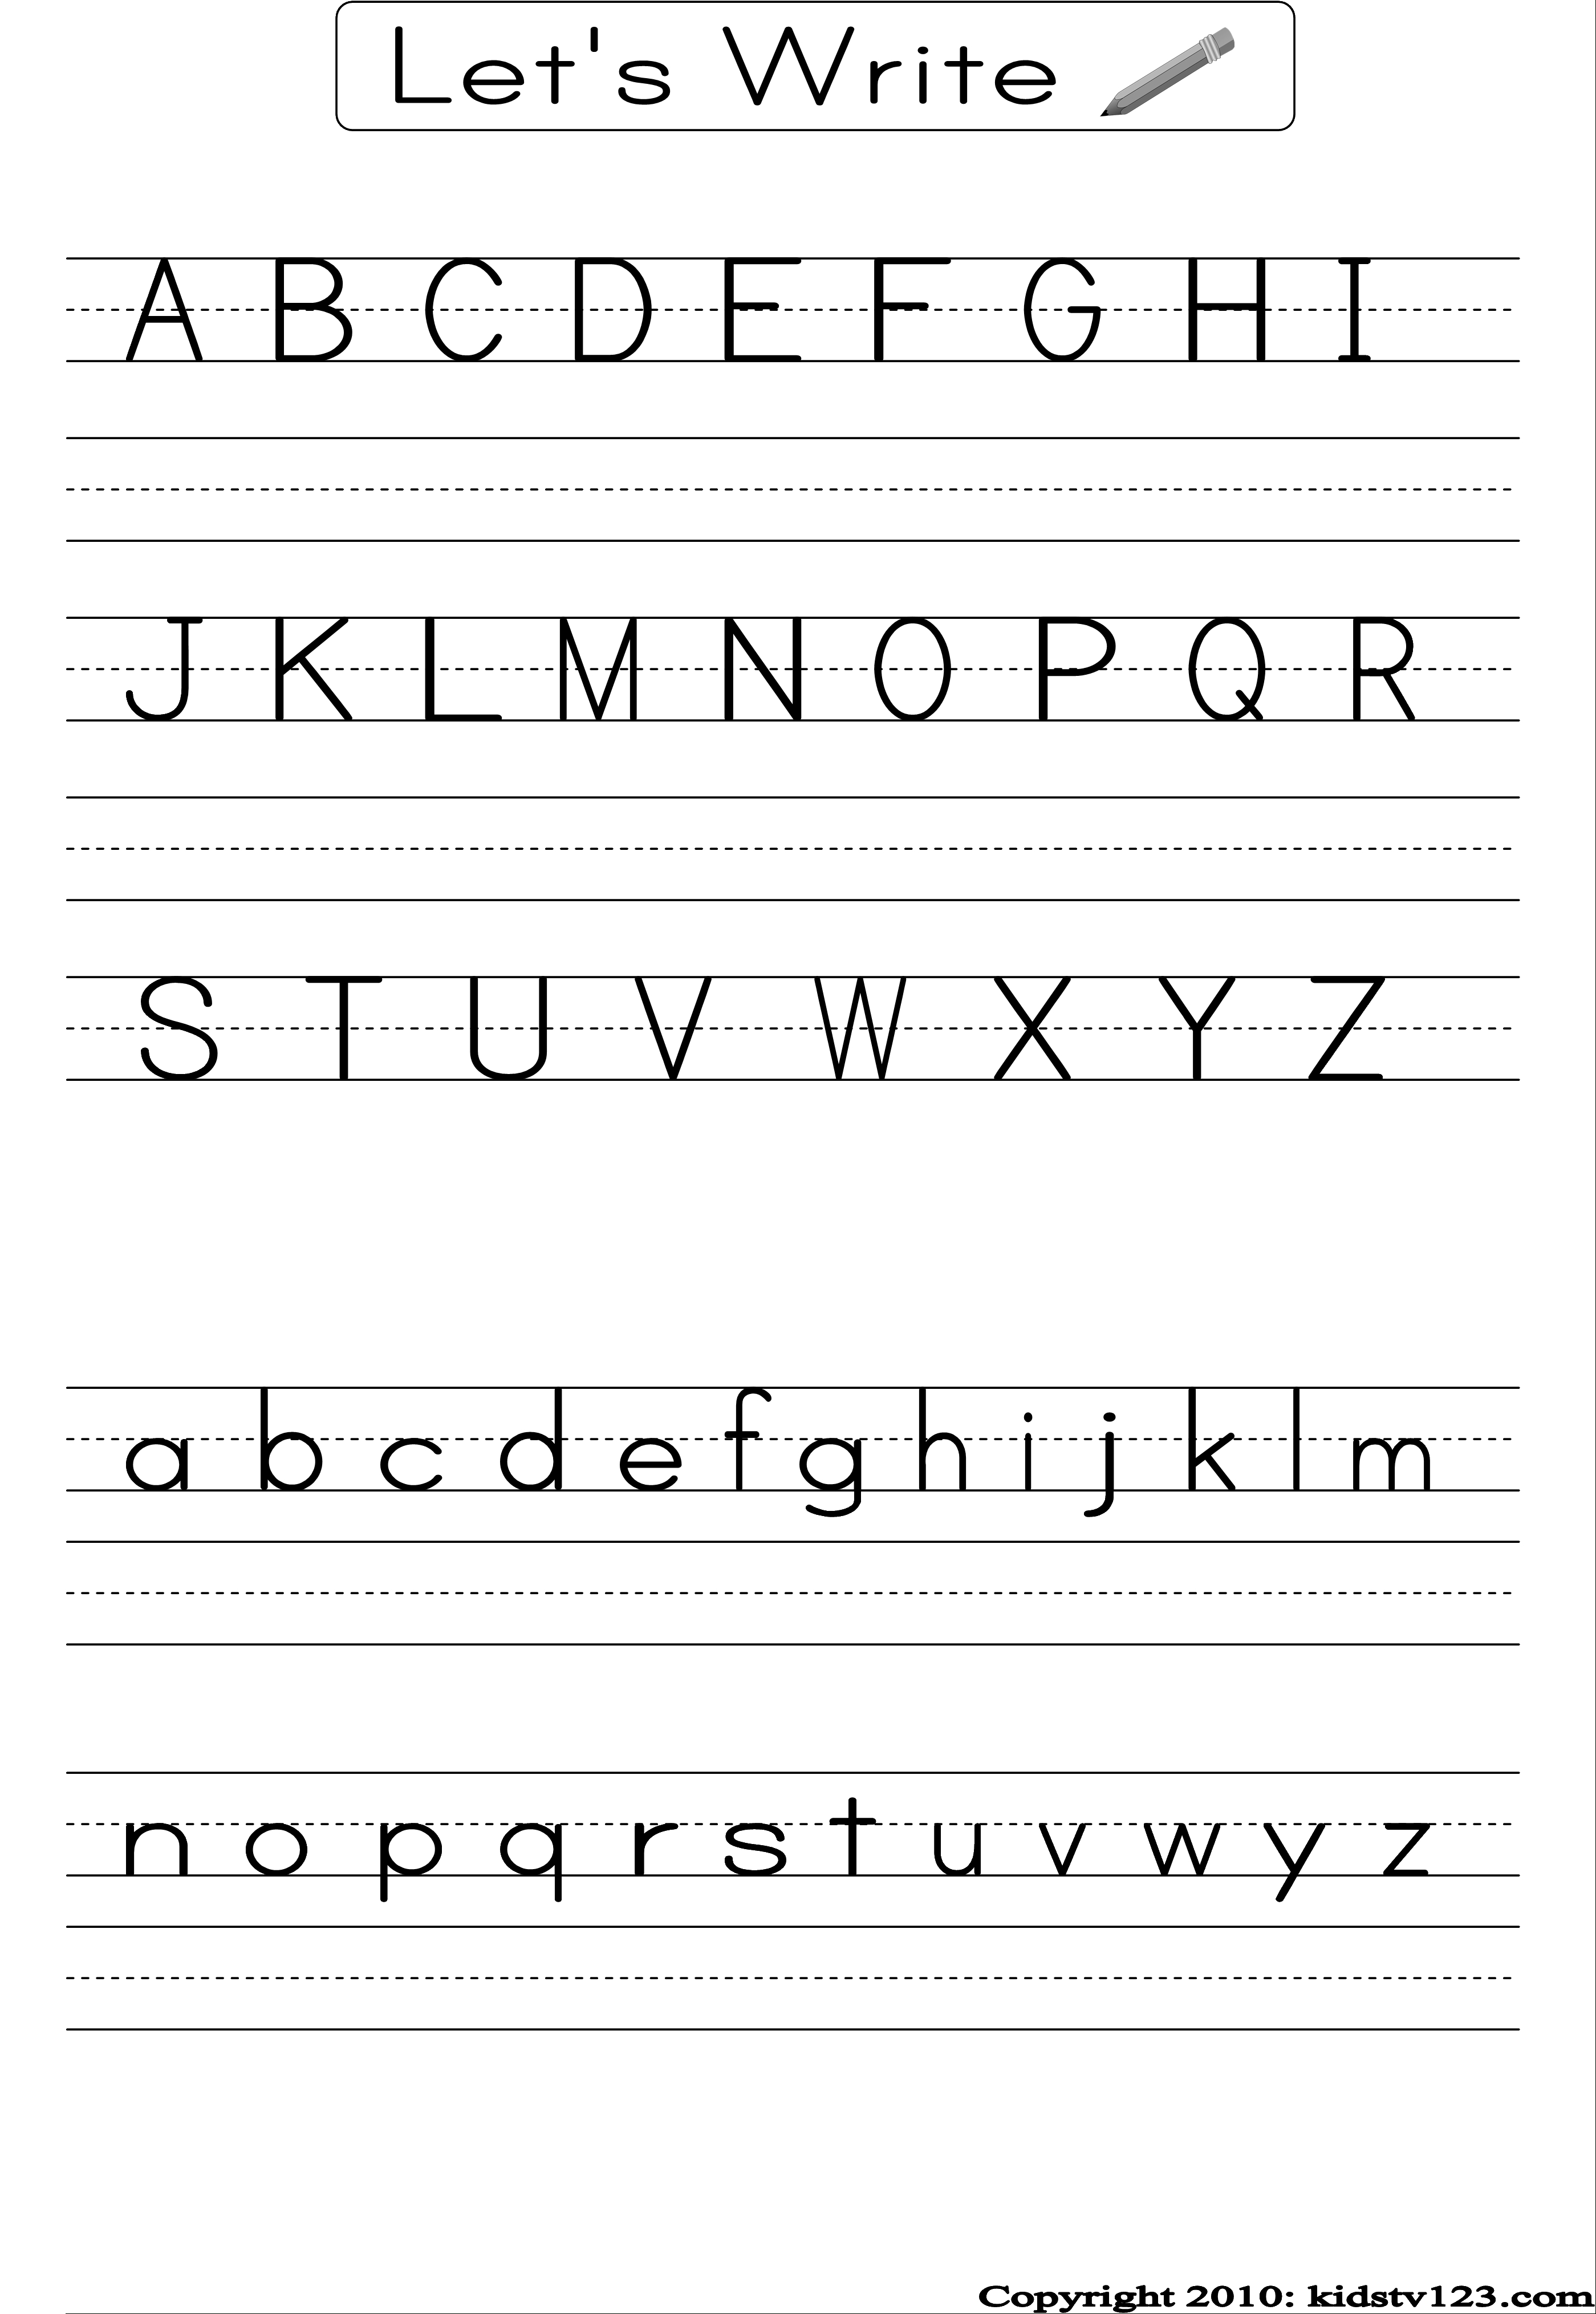 Free Printable Letter Writing Worksheets